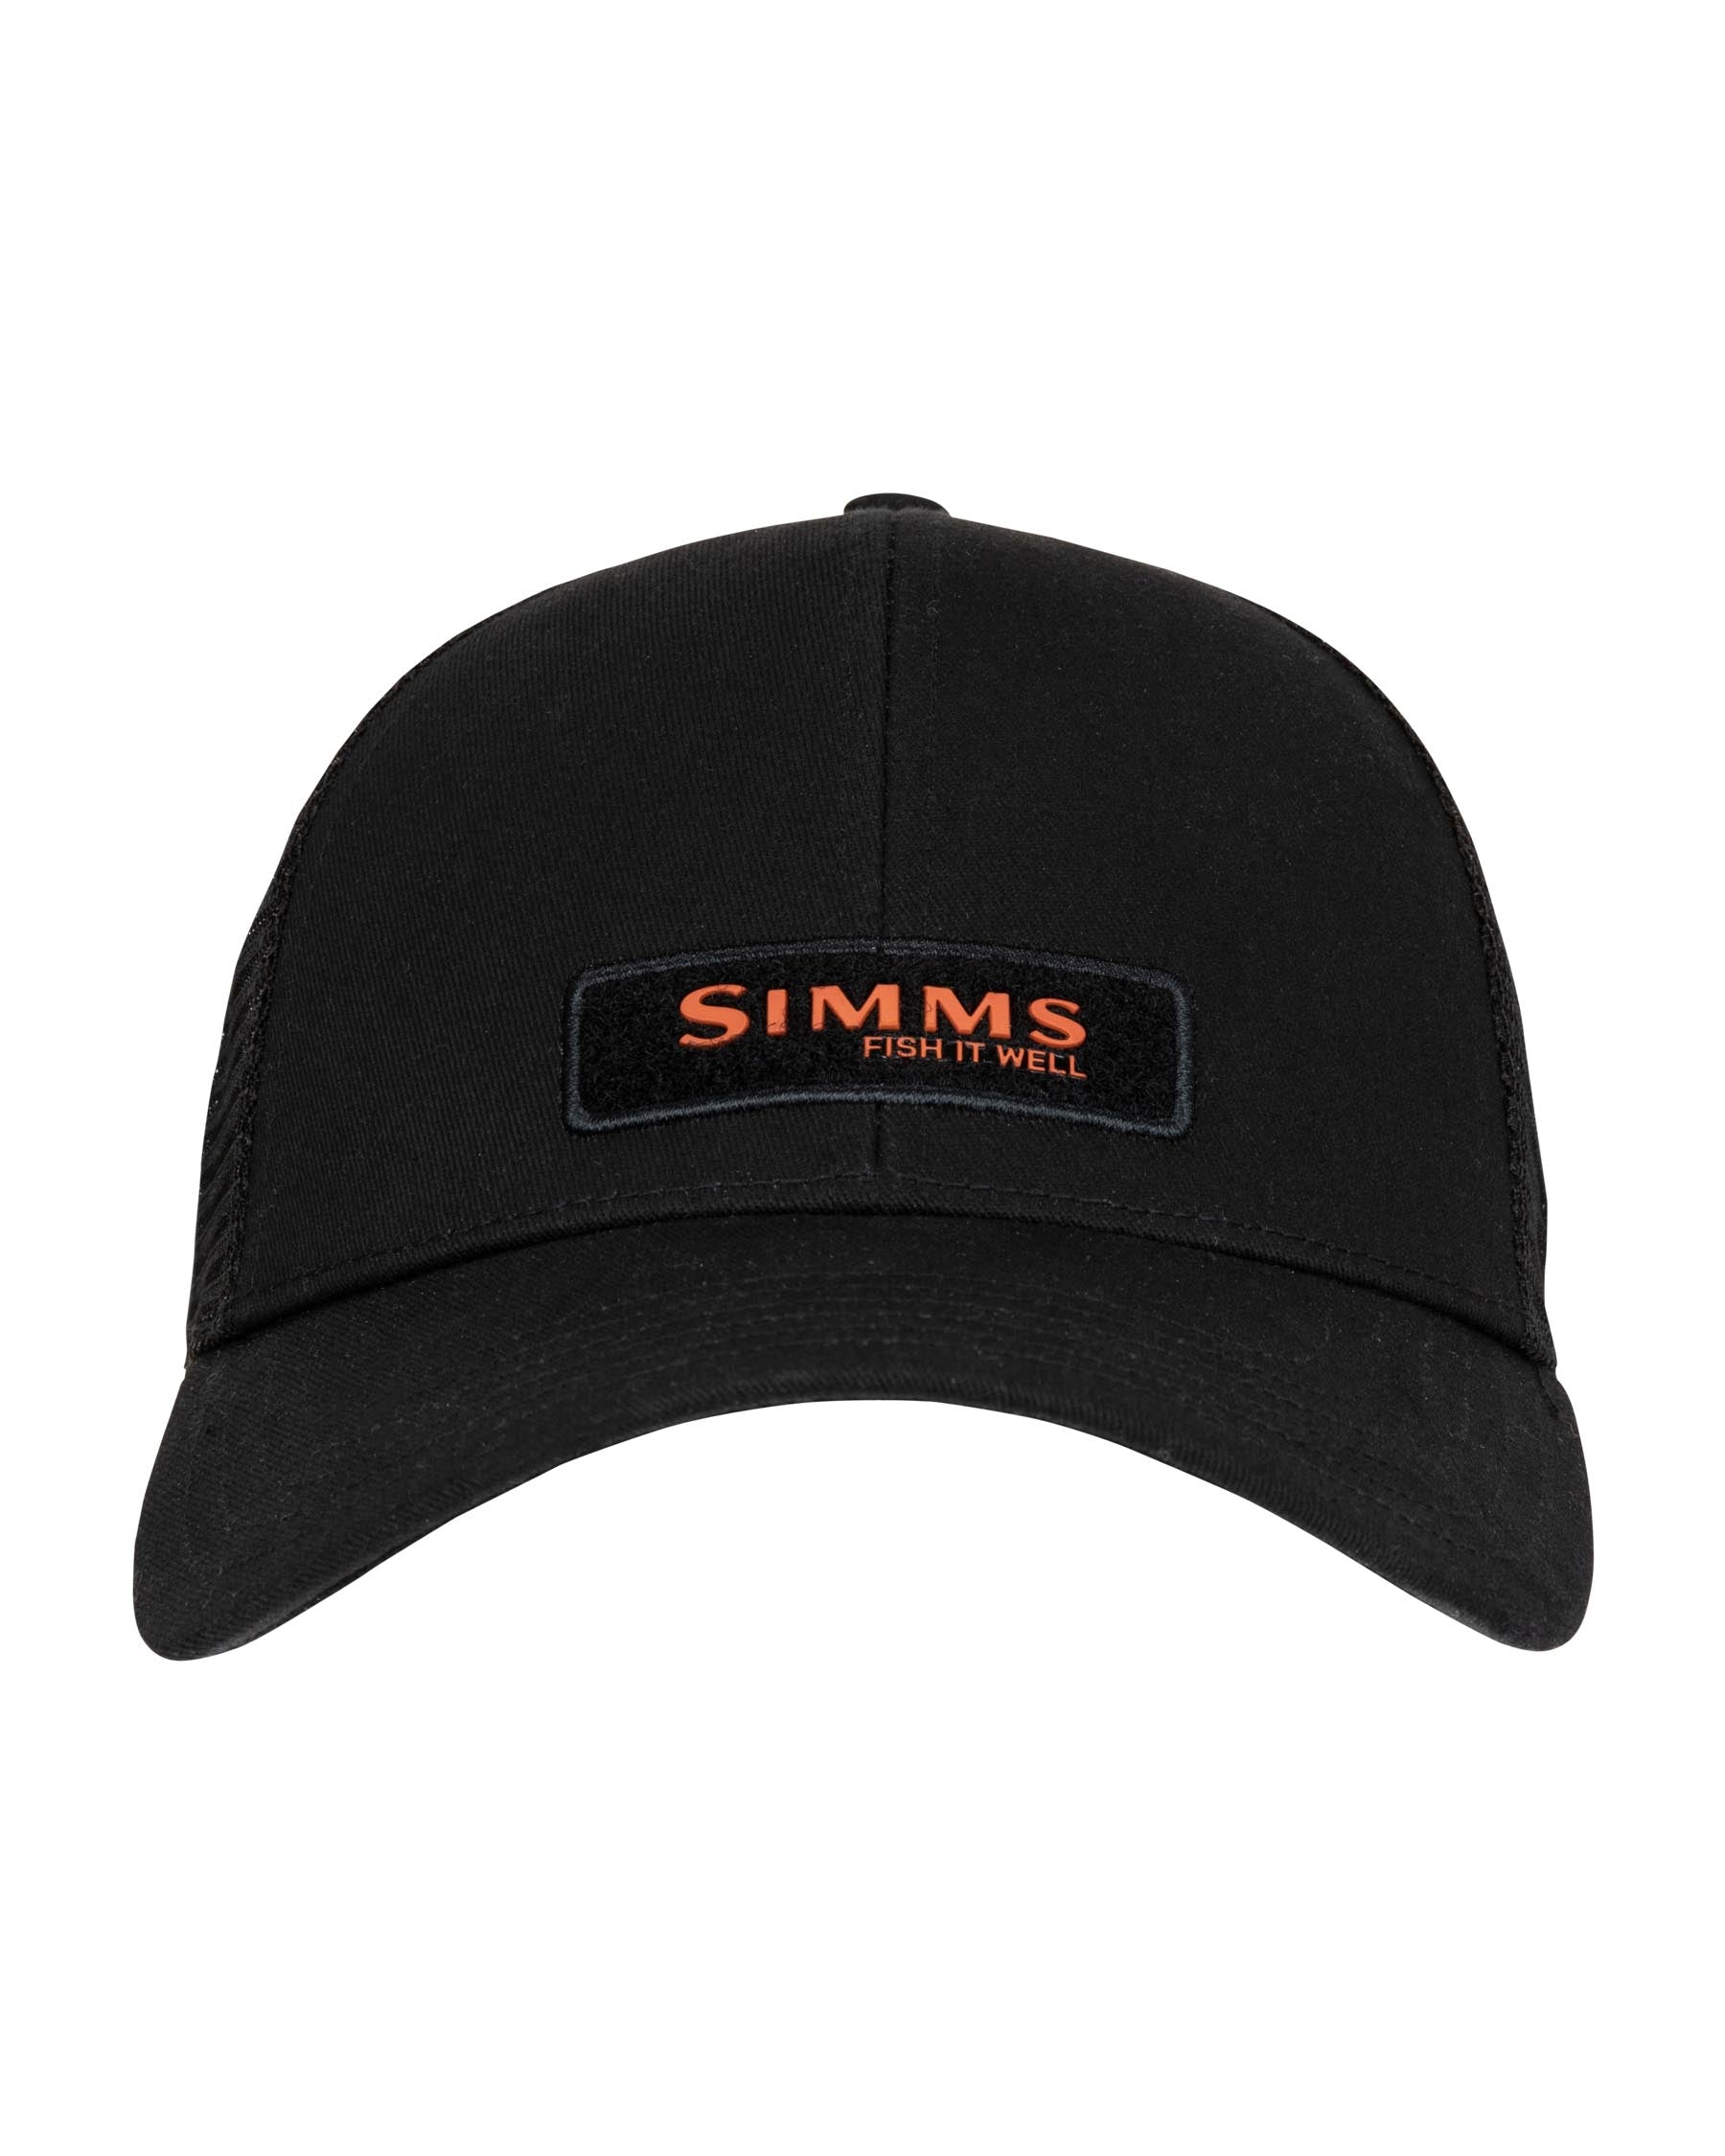 Small Fit Fish It Well Forever Trucker | Simms Fishing Products